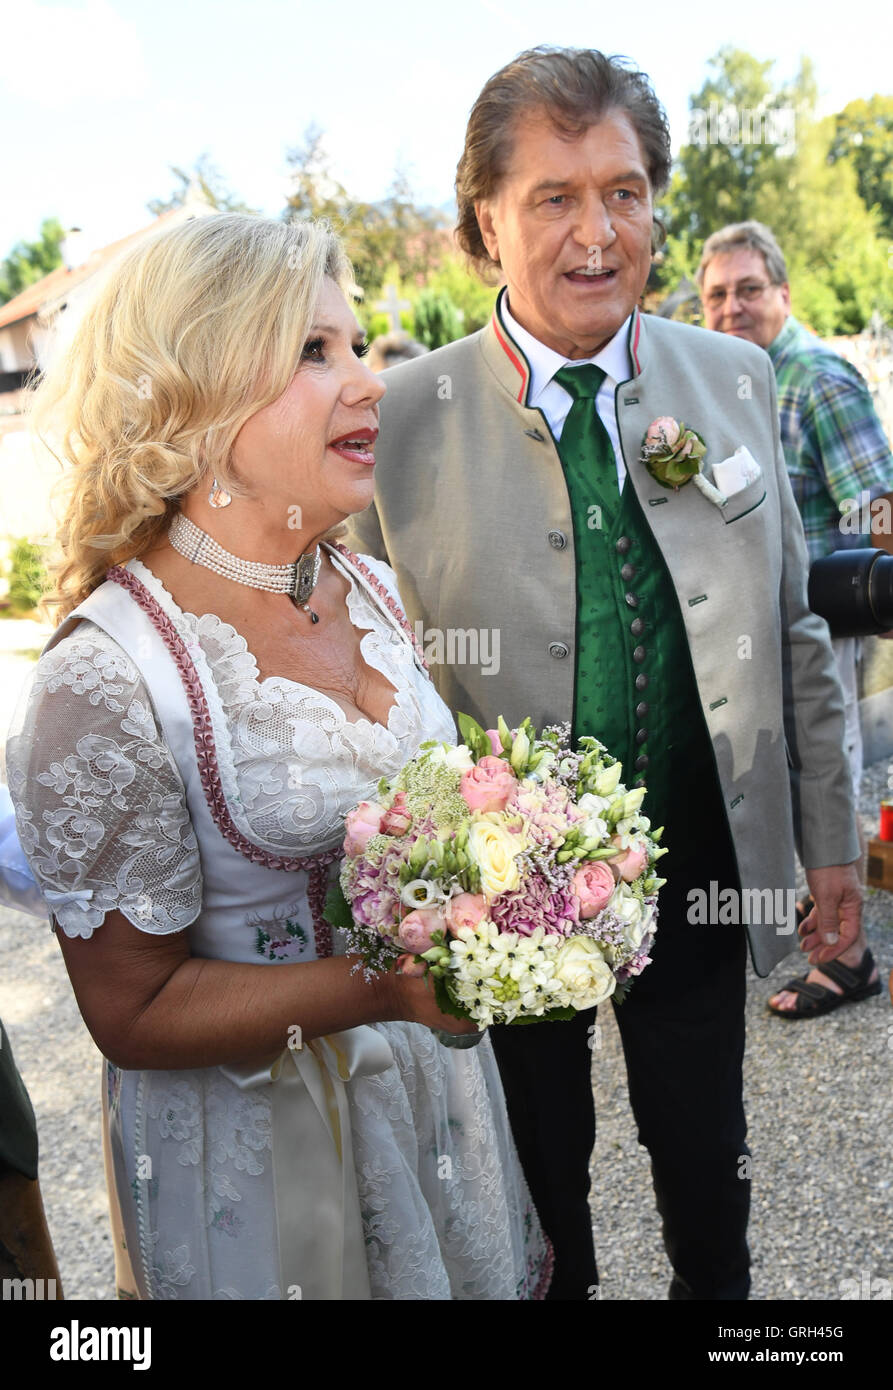 Rottach-Egern, Germany. 08th Sep, 2016. The musician couple Marianne and Michael arrives to their Catholic wedding in the St. Laurentius church on Tegernsee lake in Rottach-Egern, Germany, 08 September 2016. They were married in a civil ceremony three decades ago - now comes the church wedding. Photo: PETER KNEFFEL/dpa/Alamy Live News Stock Photo